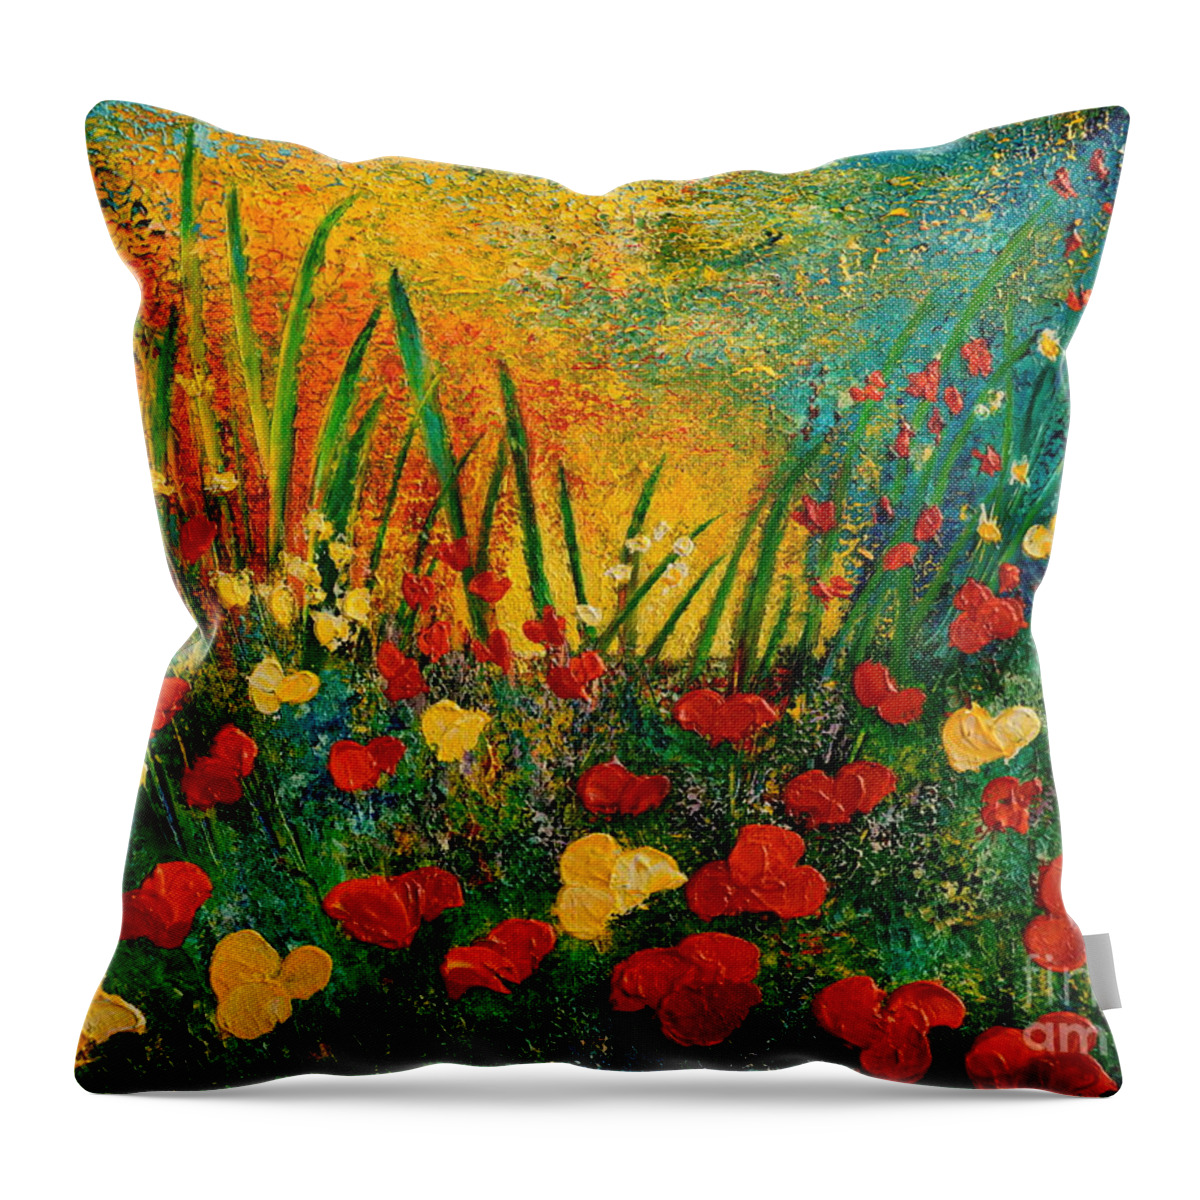 Sunset Throw Pillow featuring the painting Something I Love by Teresa Wegrzyn